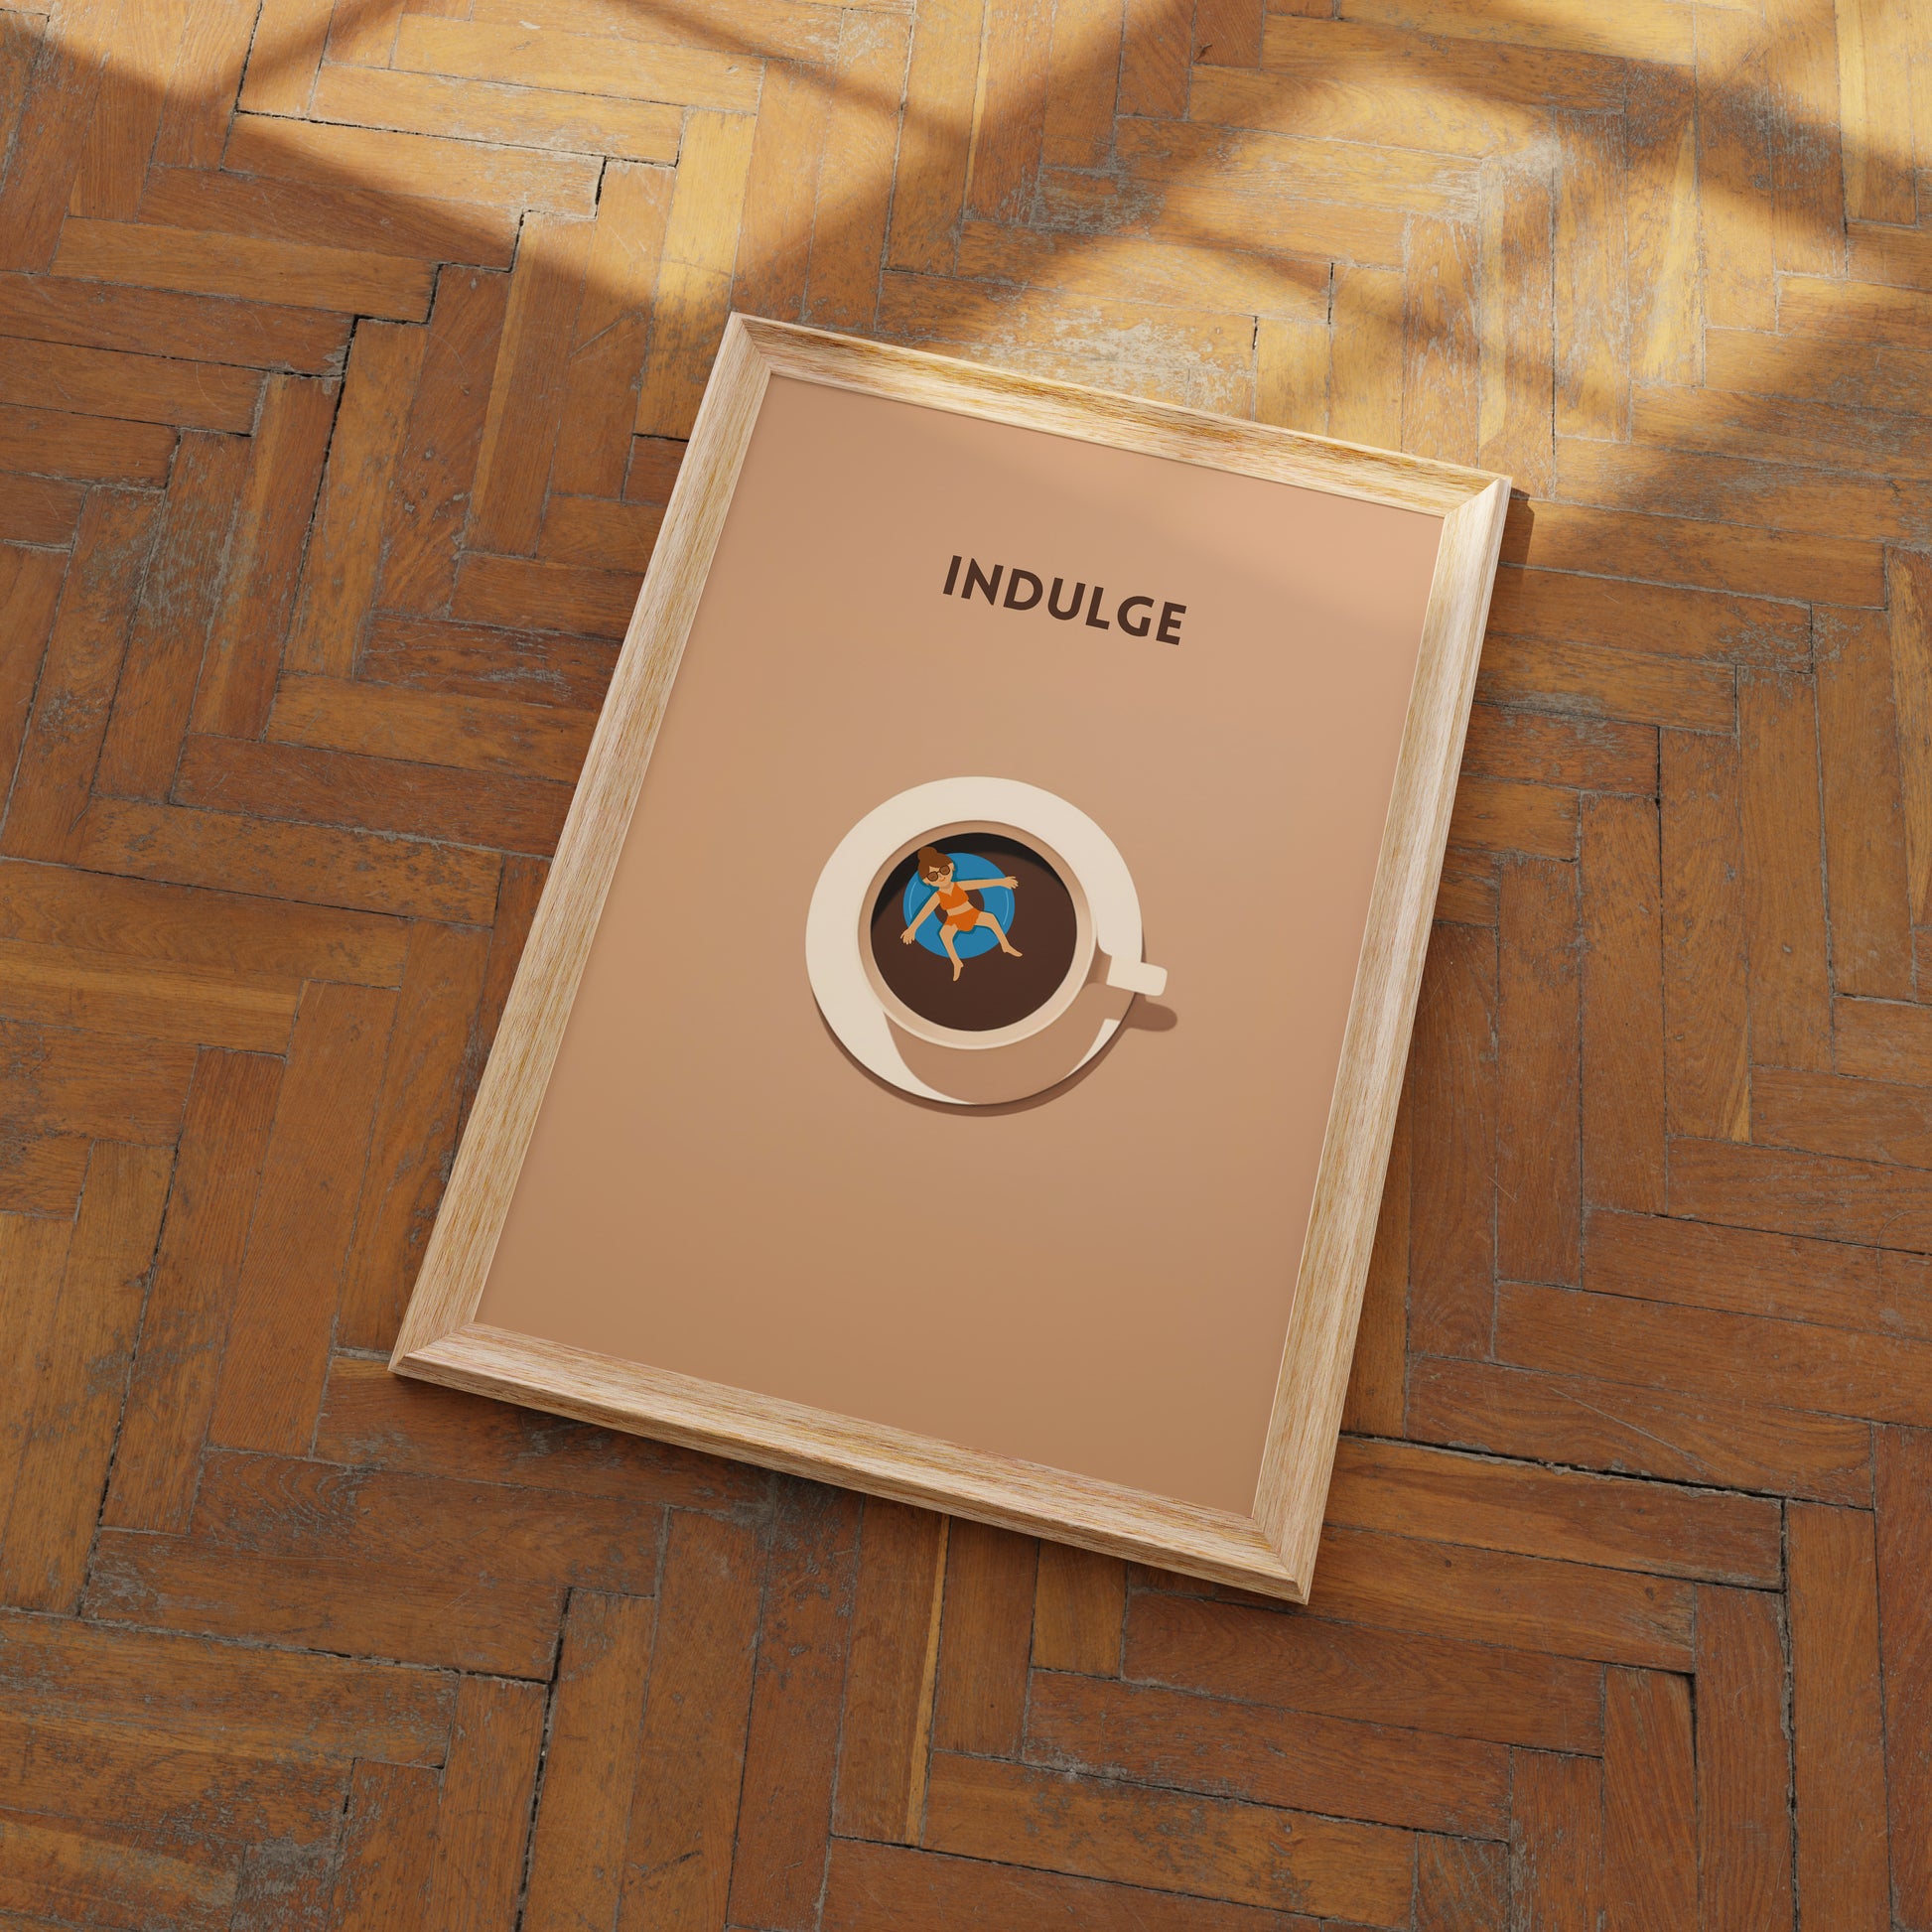 A book titled "INDULGE" with a magnifying glass and a small figure on the cover, lying on a wooden floor.